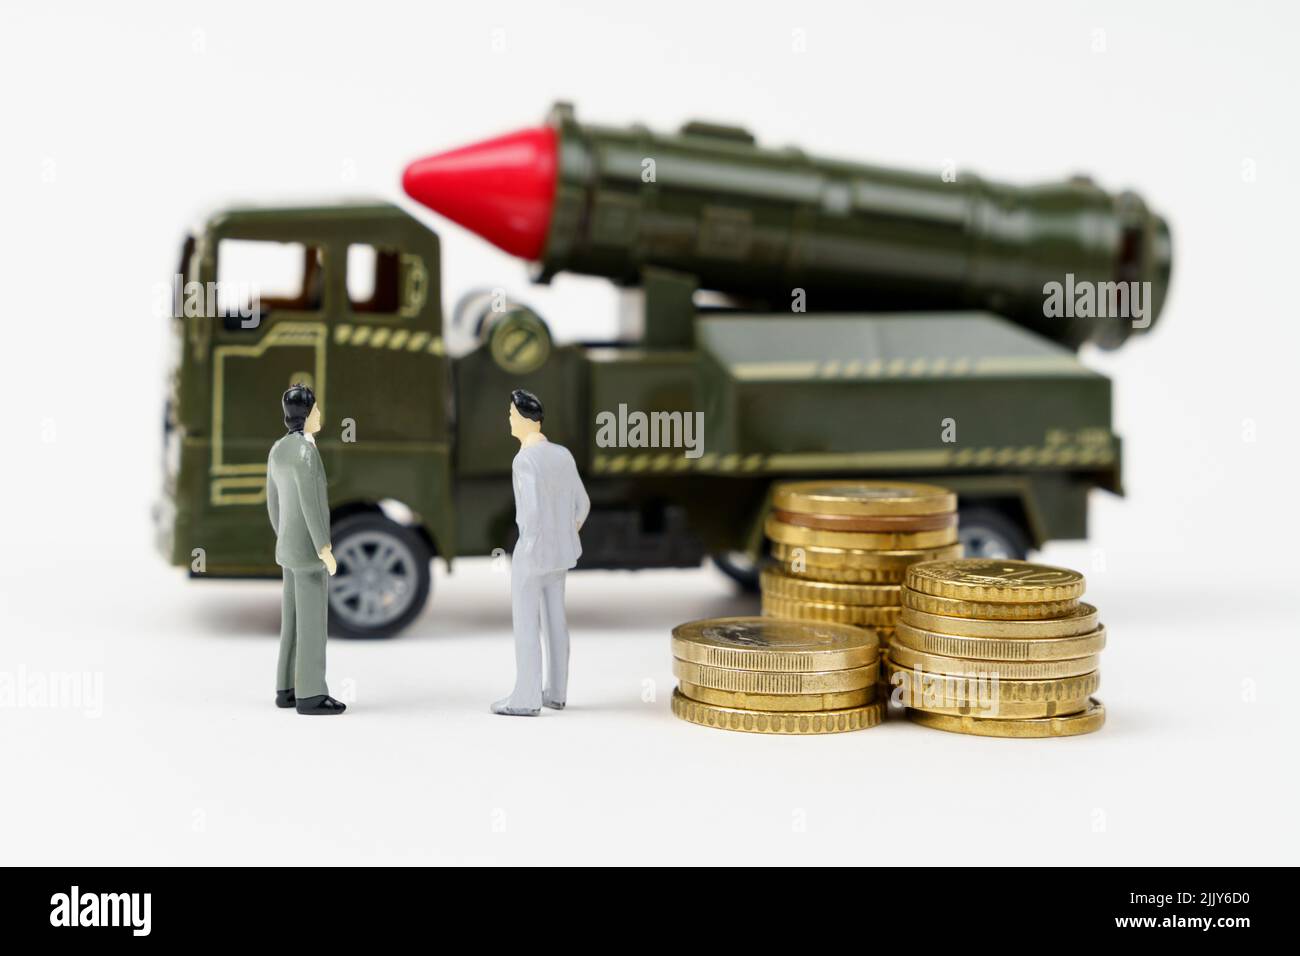 The concept of the military budget. On a white surface are figurines of people, coins and a toy military vehicle. Stock Photo